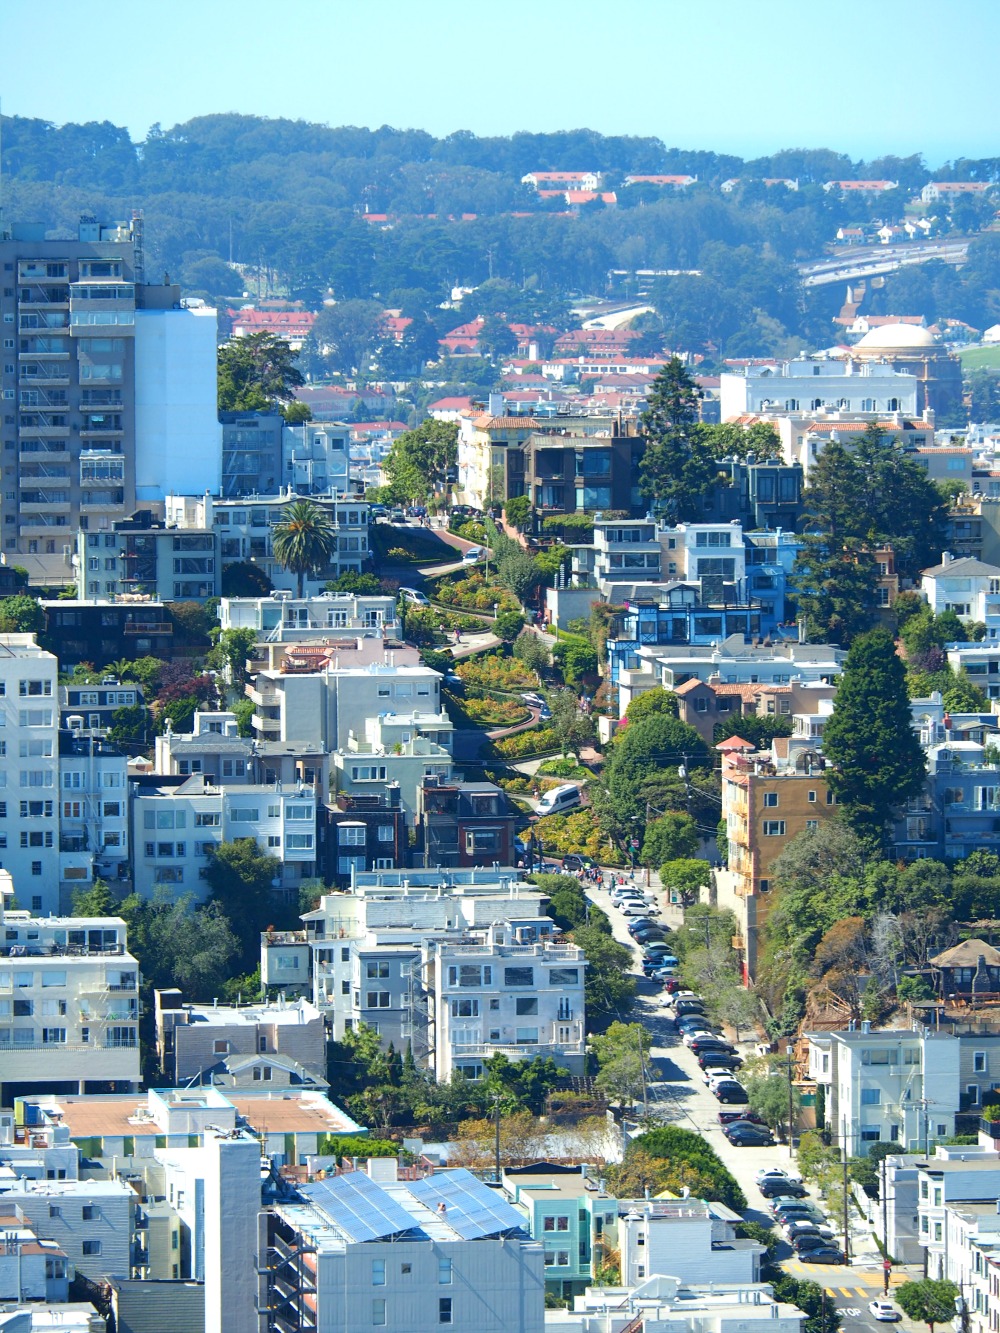 Lombard Street from Coit Tower